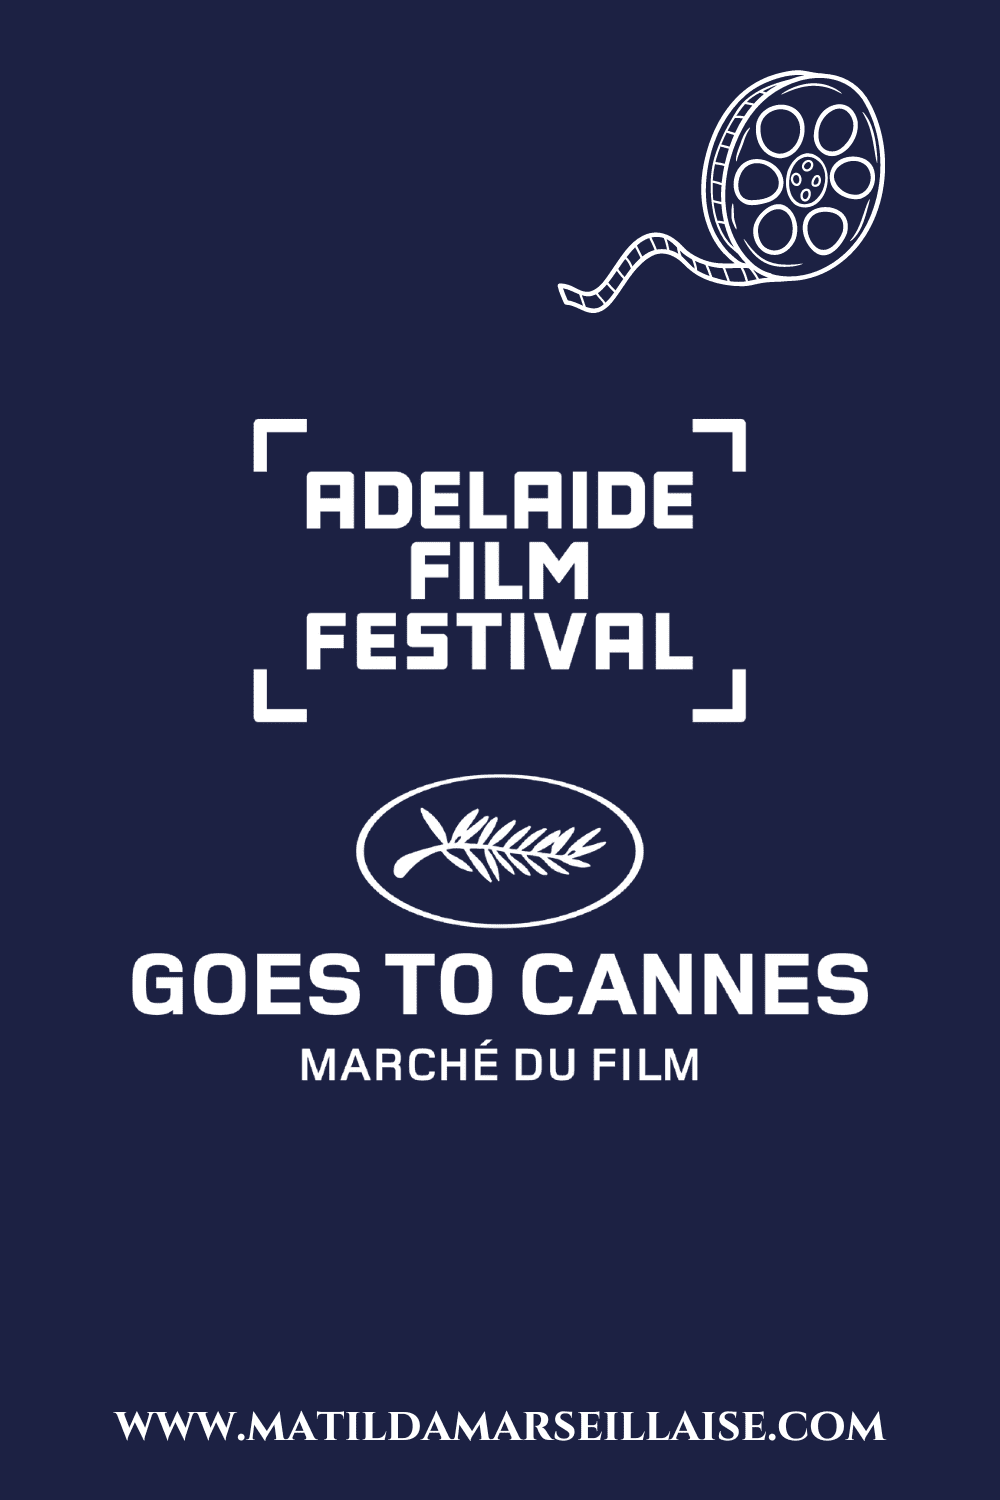 Adelaide Film Festival x Cannes Film Festival – a delegation of 10 Australian film makers to go to Cannes